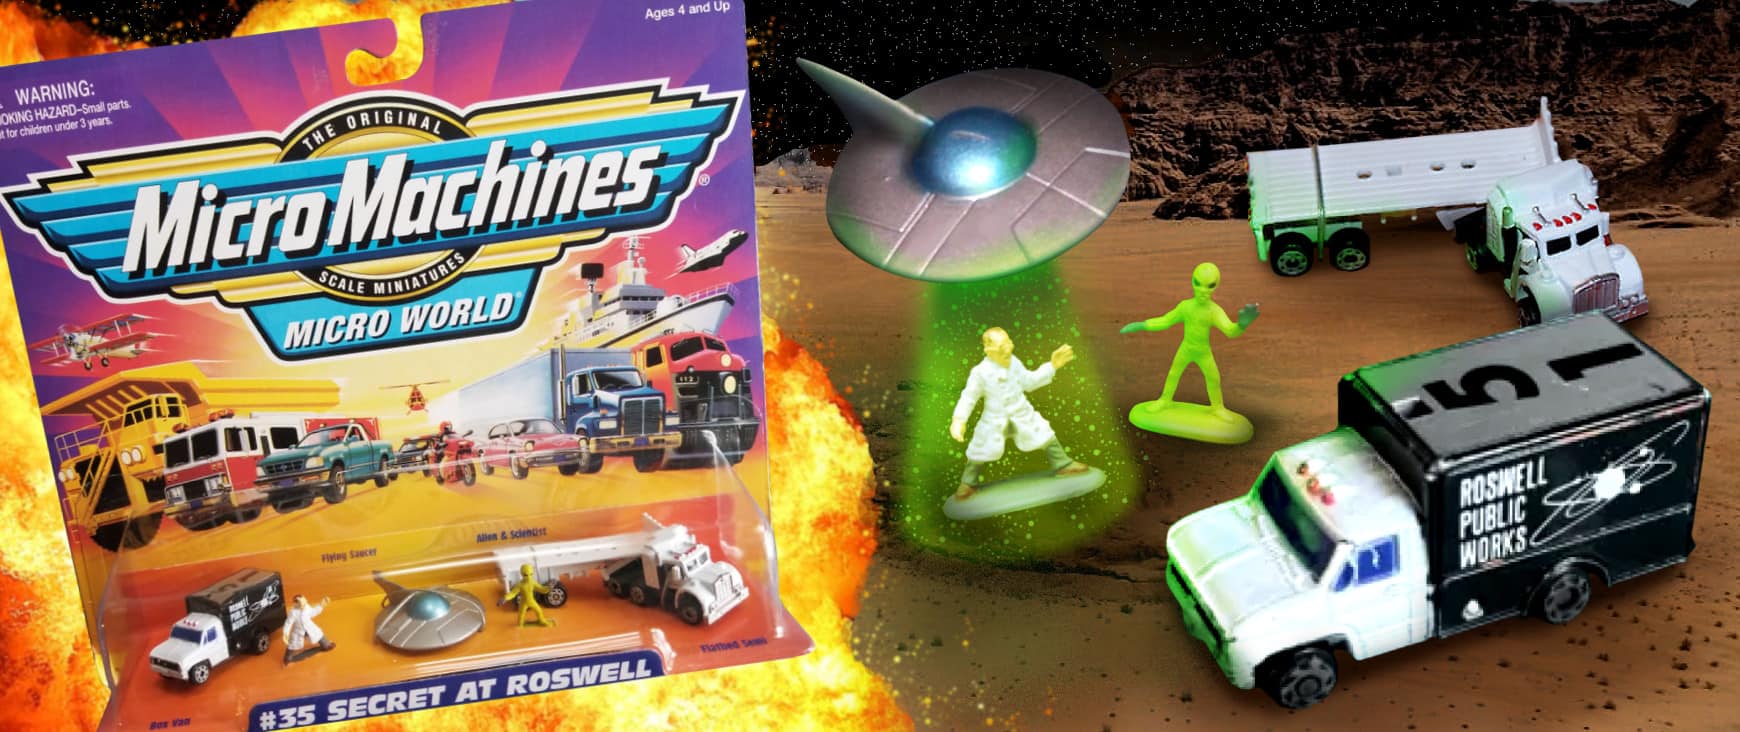 Micro Machines #35 Secret At Roswell released 1993